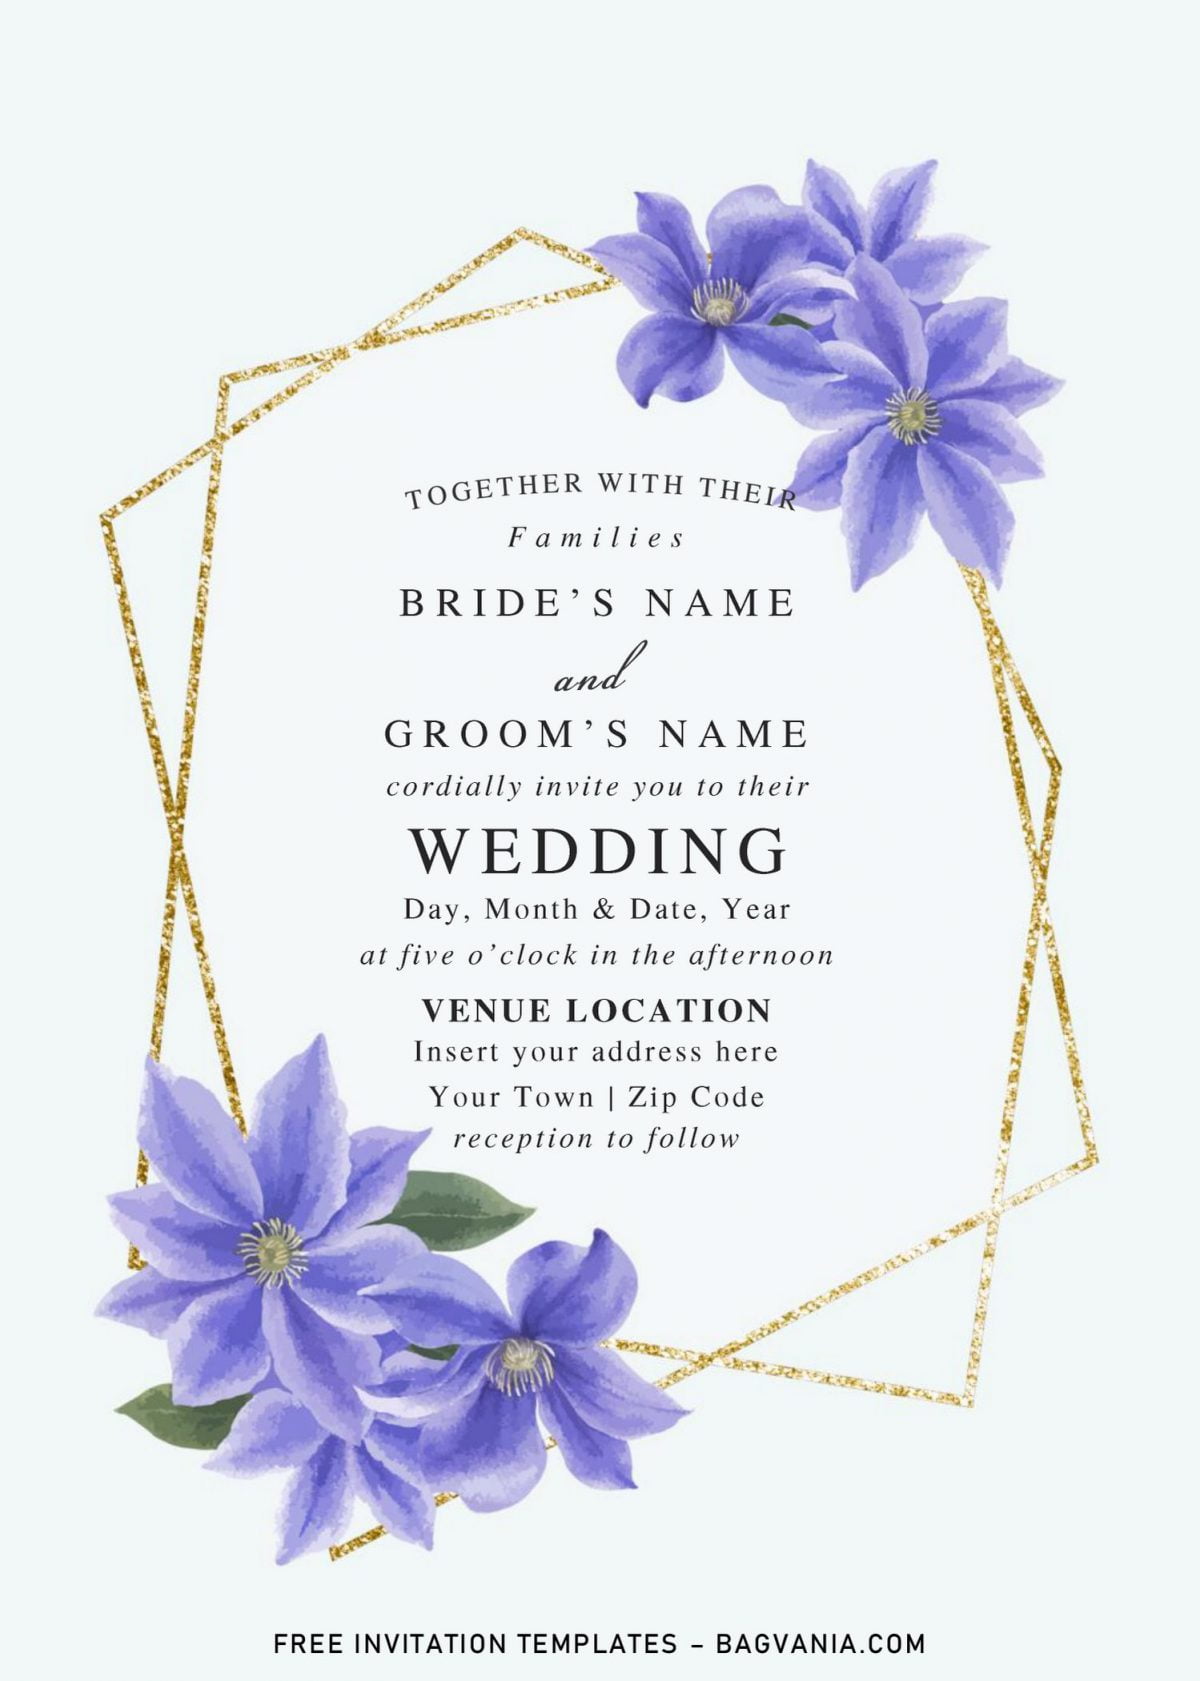 Free Blue Floral And Gold Geometric Wedding Invitation Templates For Word and has solid white background